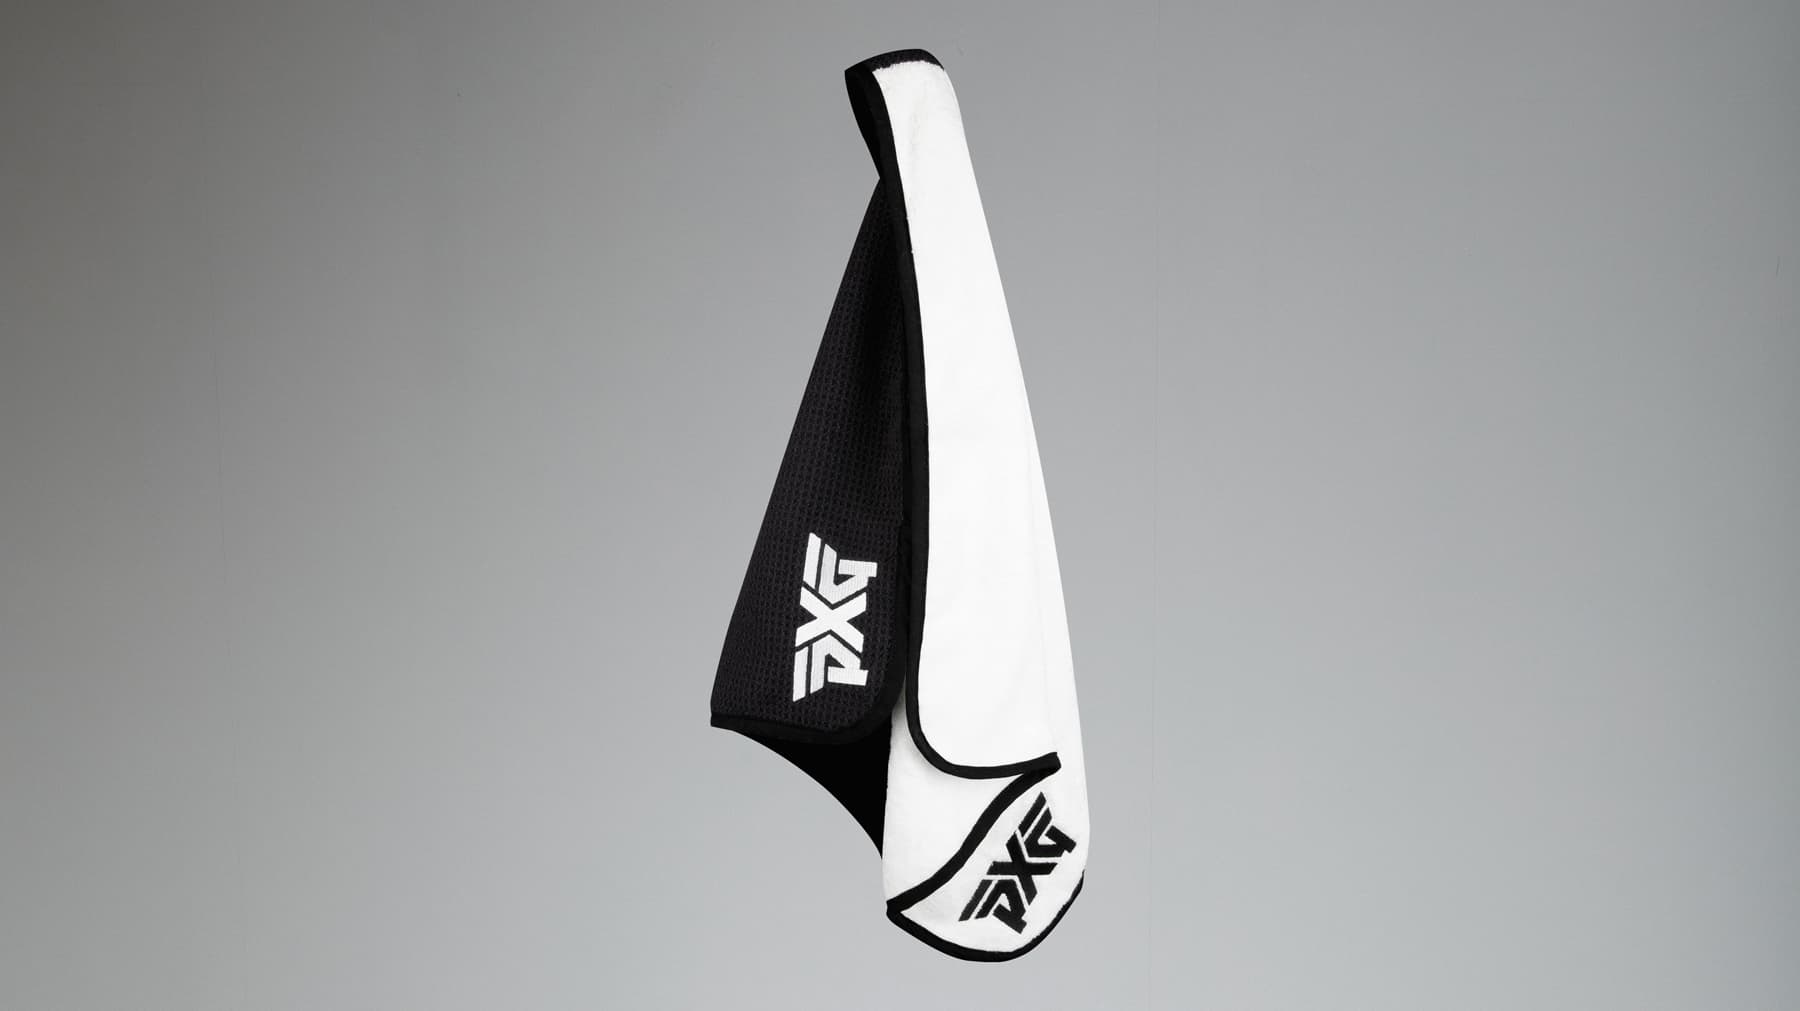 PXG Unisex Terry Cloth Players Towel